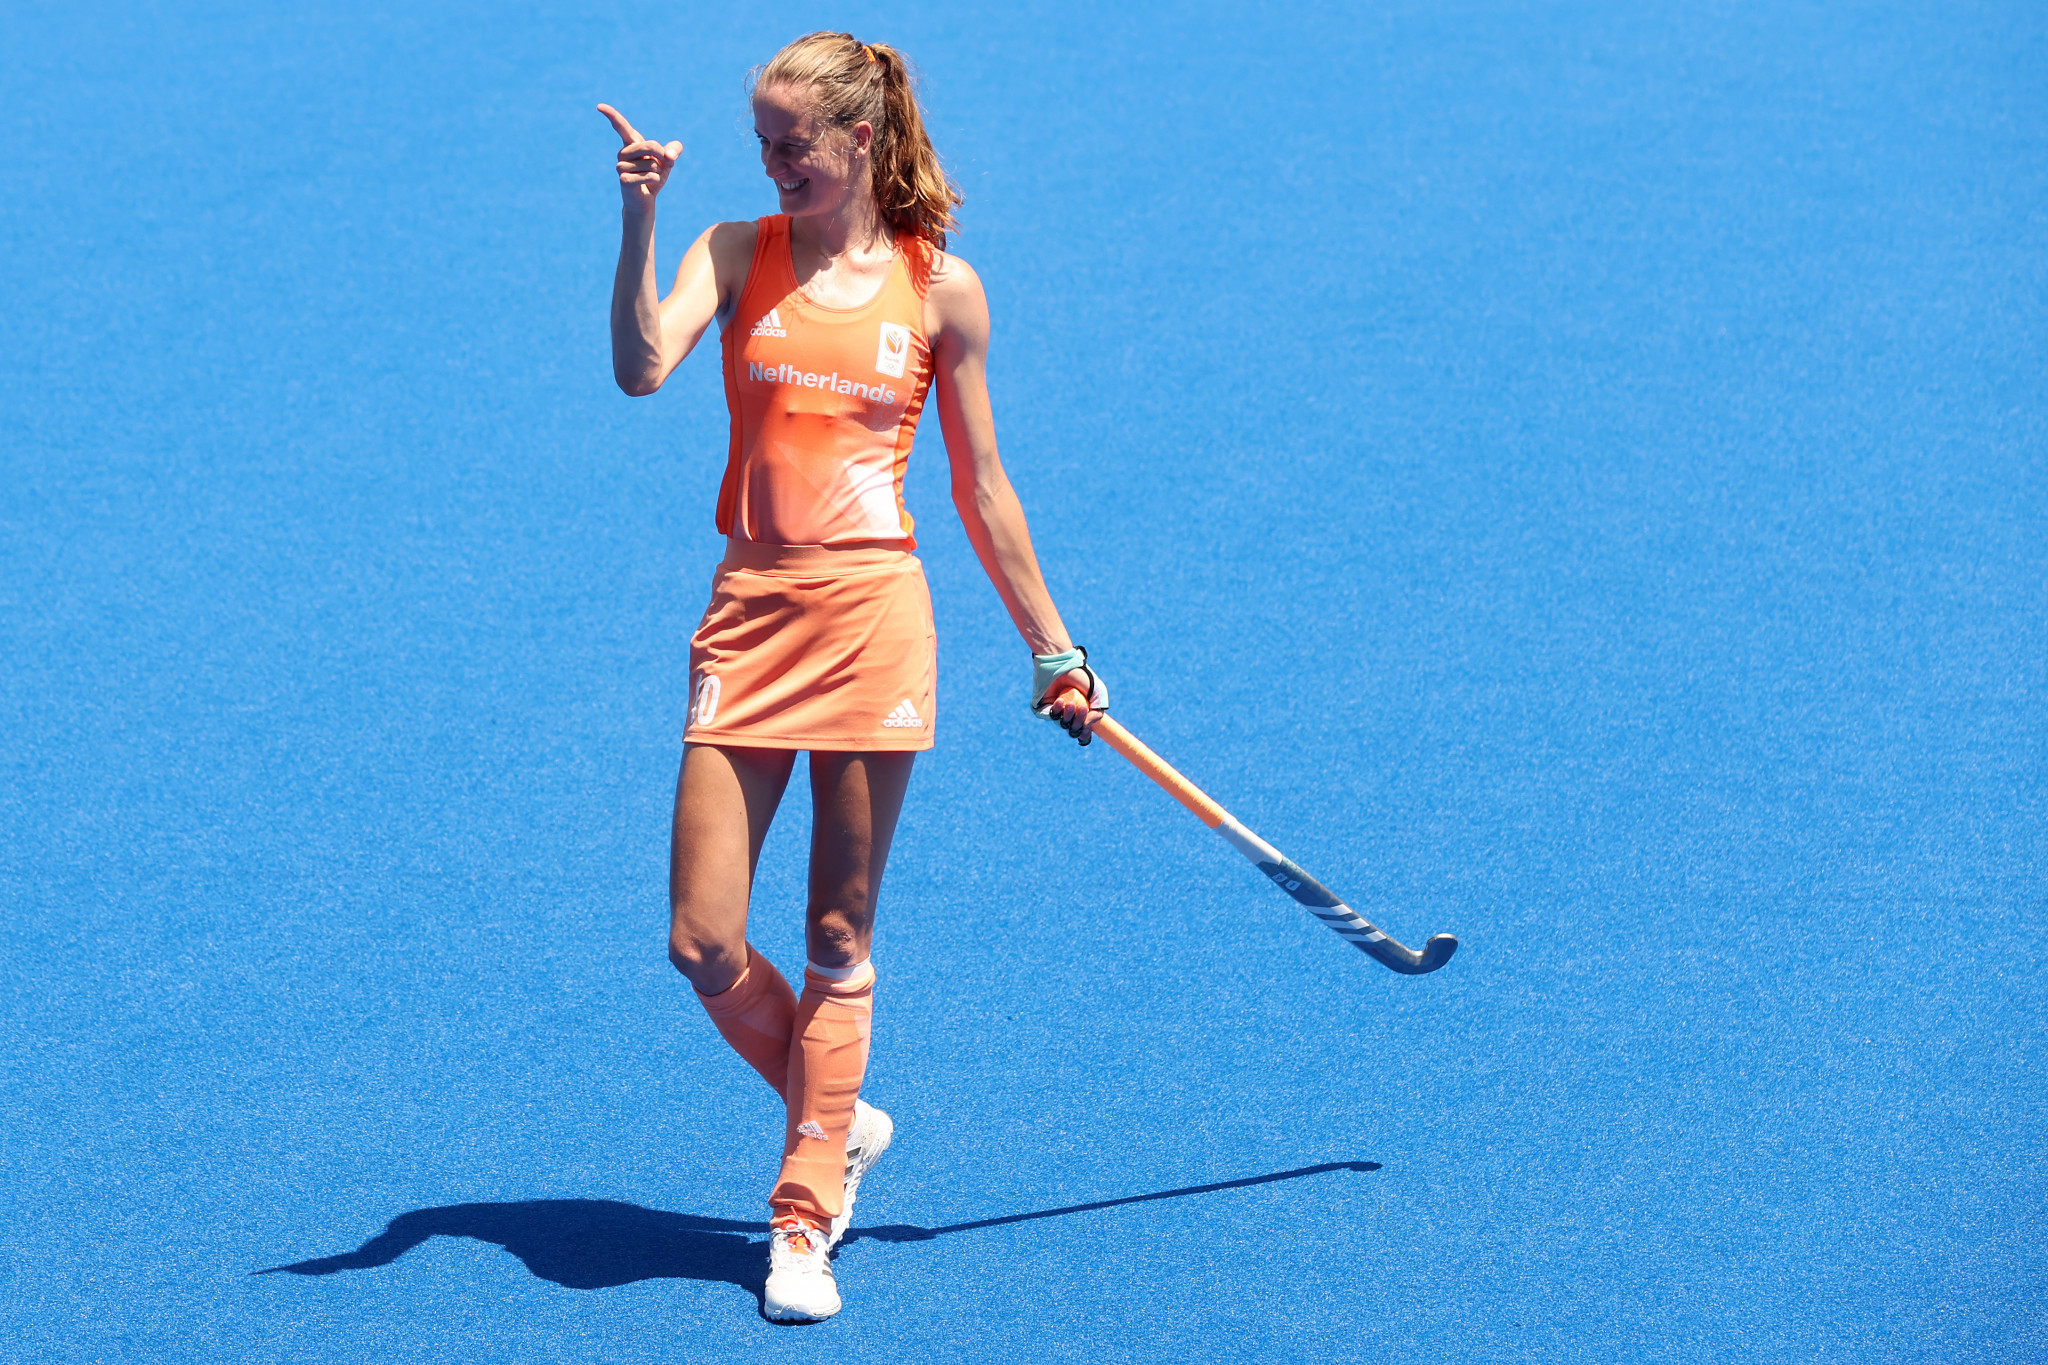 Felice Albers scored twice as the Dutch world champions brushed aside Britain 5-1, setting up a women's hockey final against Argentina - a rematch of the London 2012 gold-medal game ©Getty Images